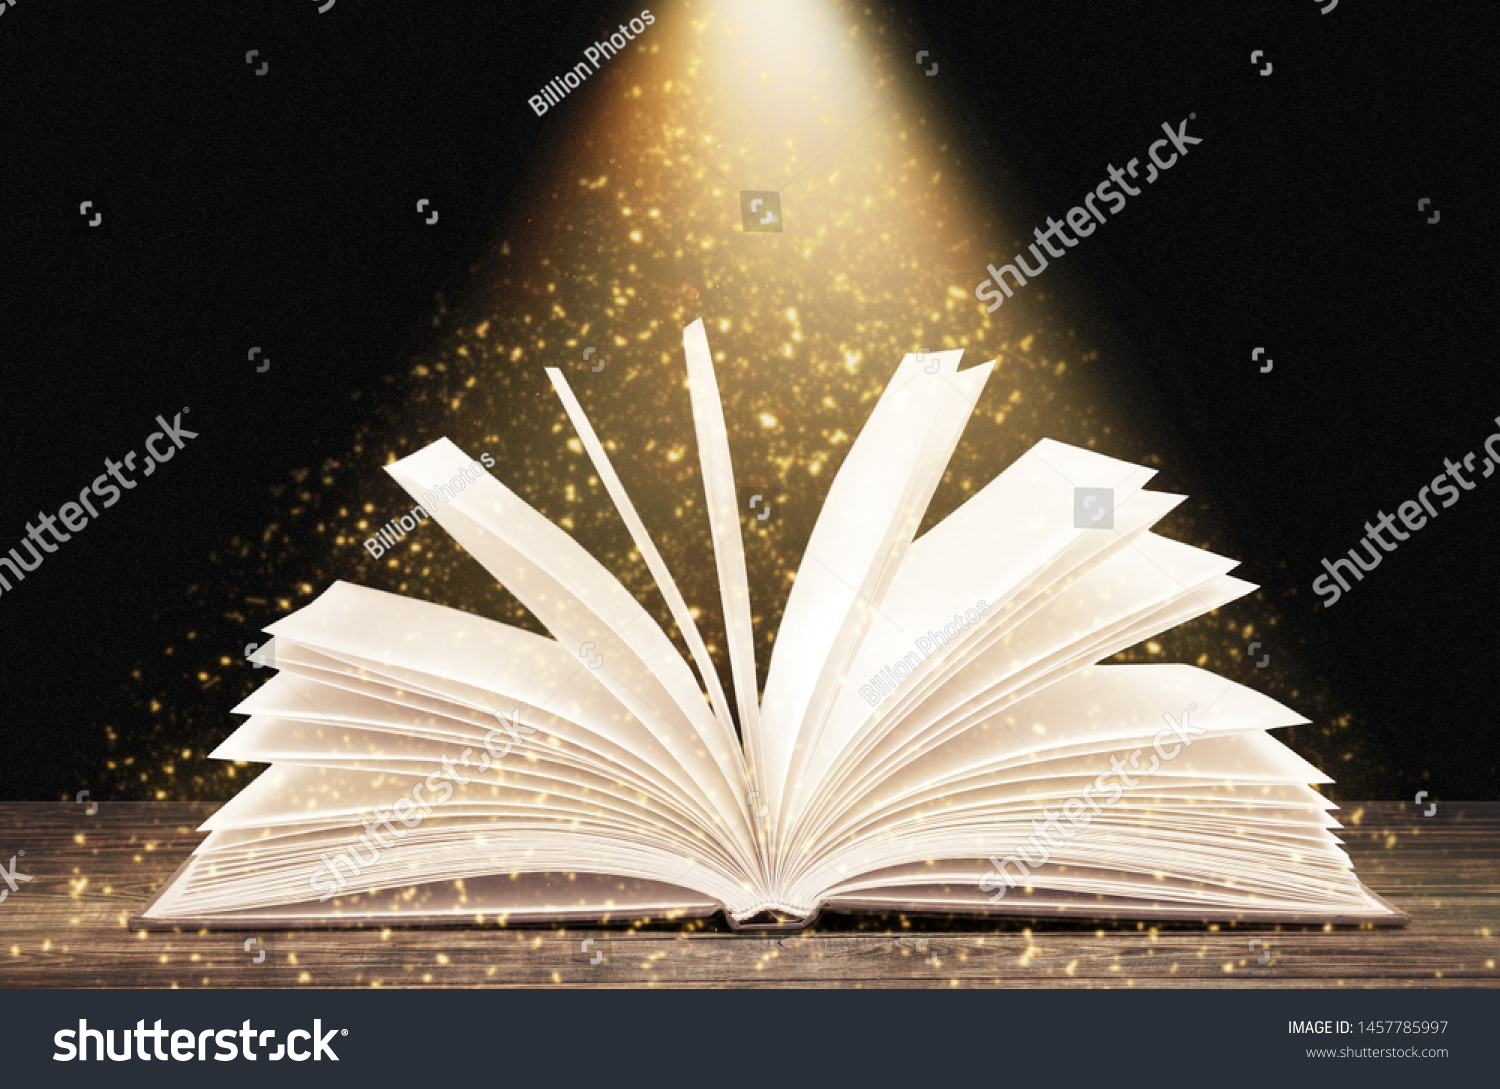 Image of opened magic book with magic lights #1457785997